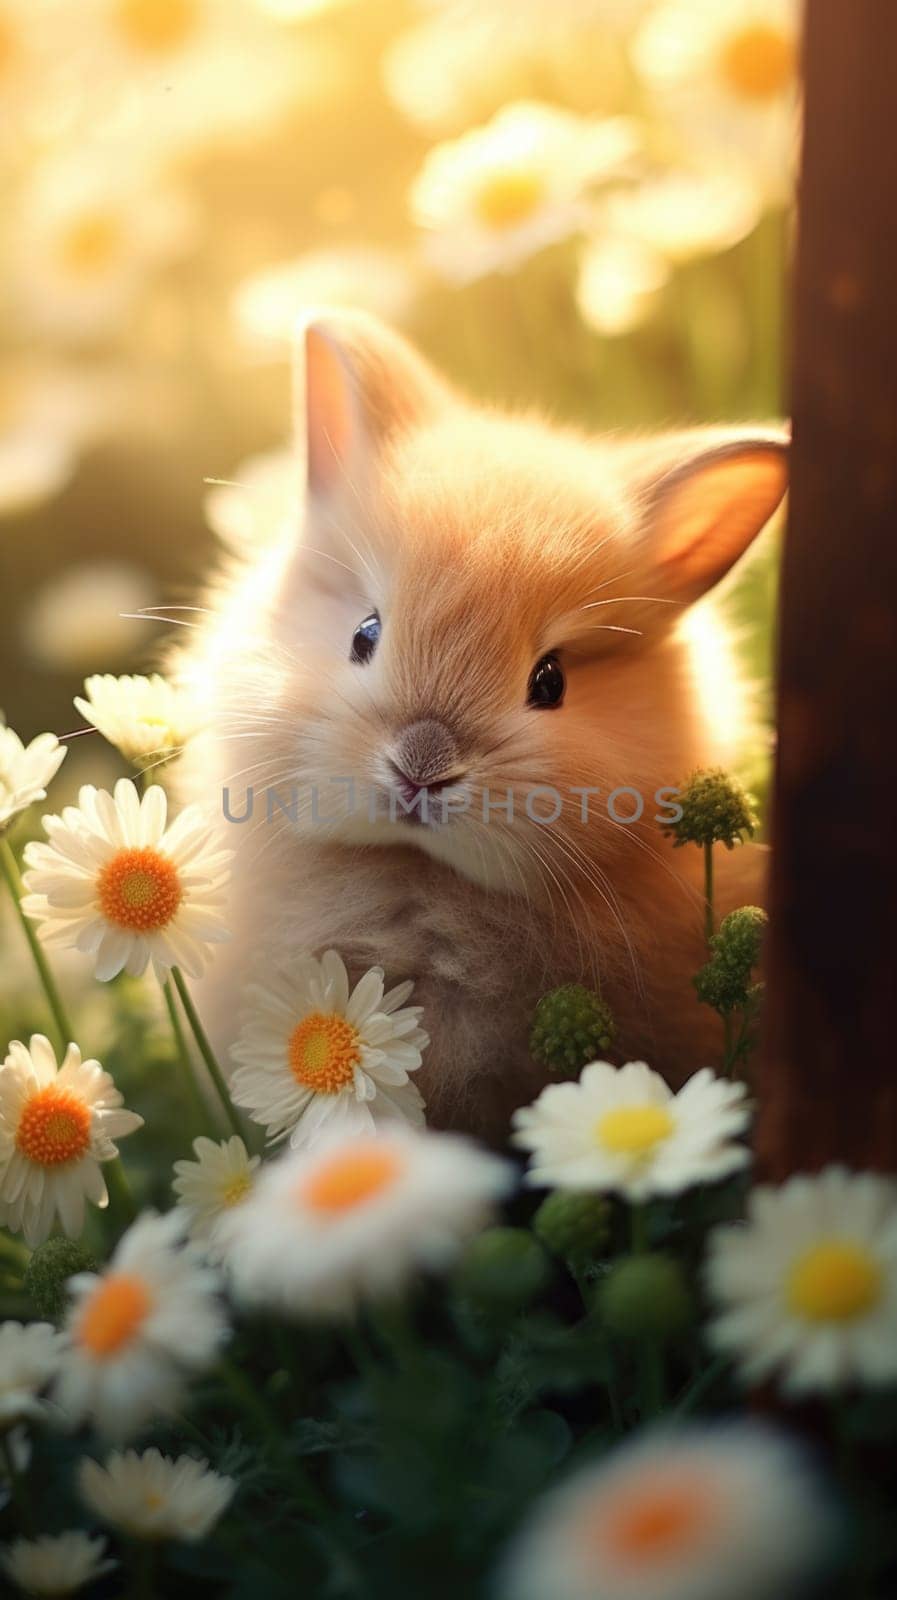 A small bunny sitting in a field of flowers